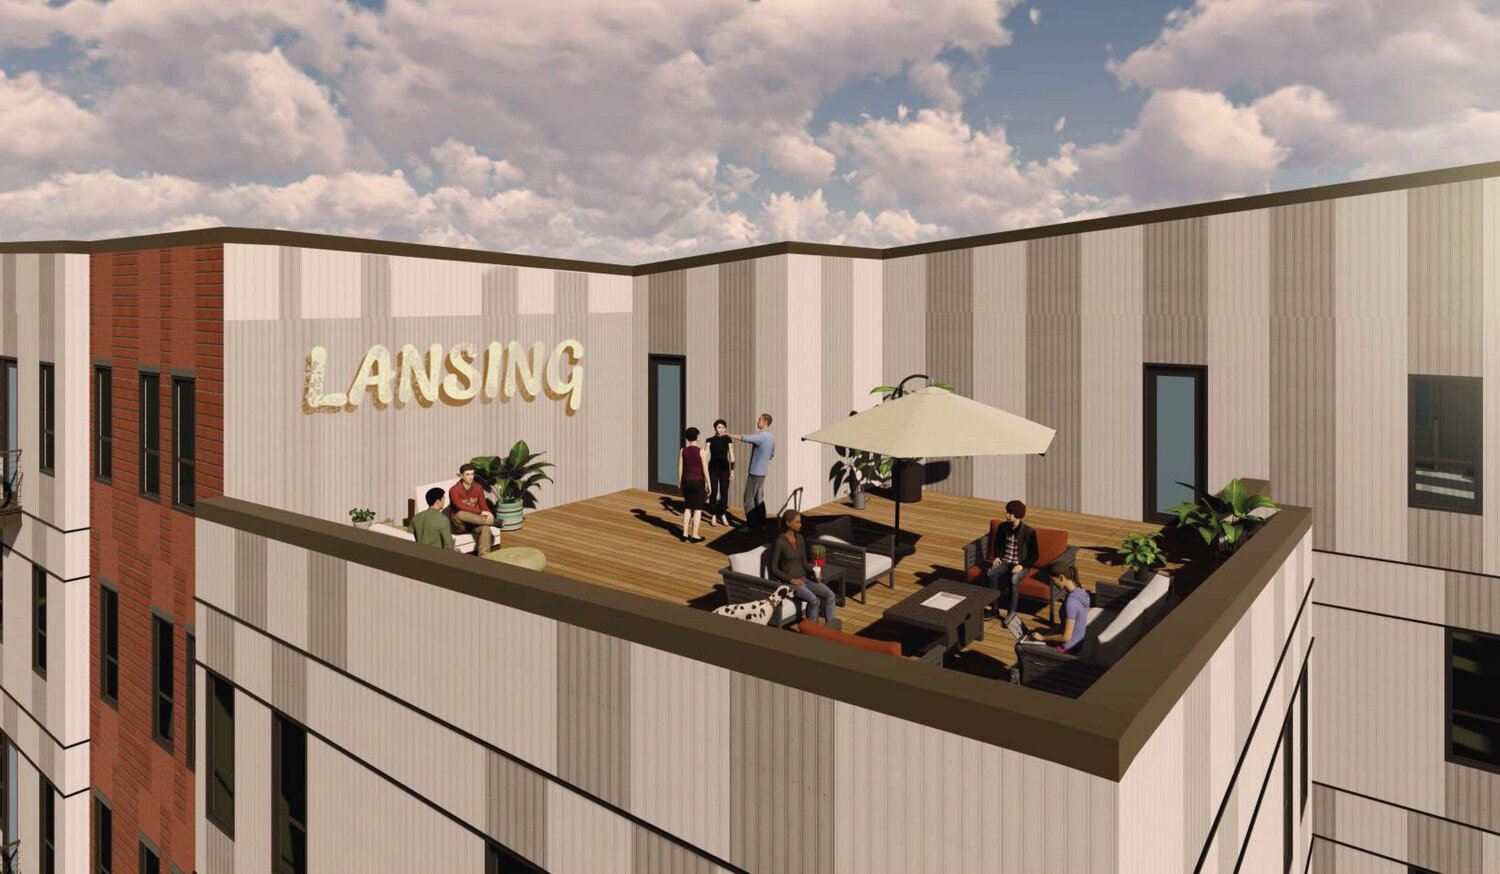 Renderings by Hooker Dejong, a Grand Rapids-based architectural firm, of a mixed-use residential and commercial project that the Lansing Housing Commission is pursuing for downtown Lansing.